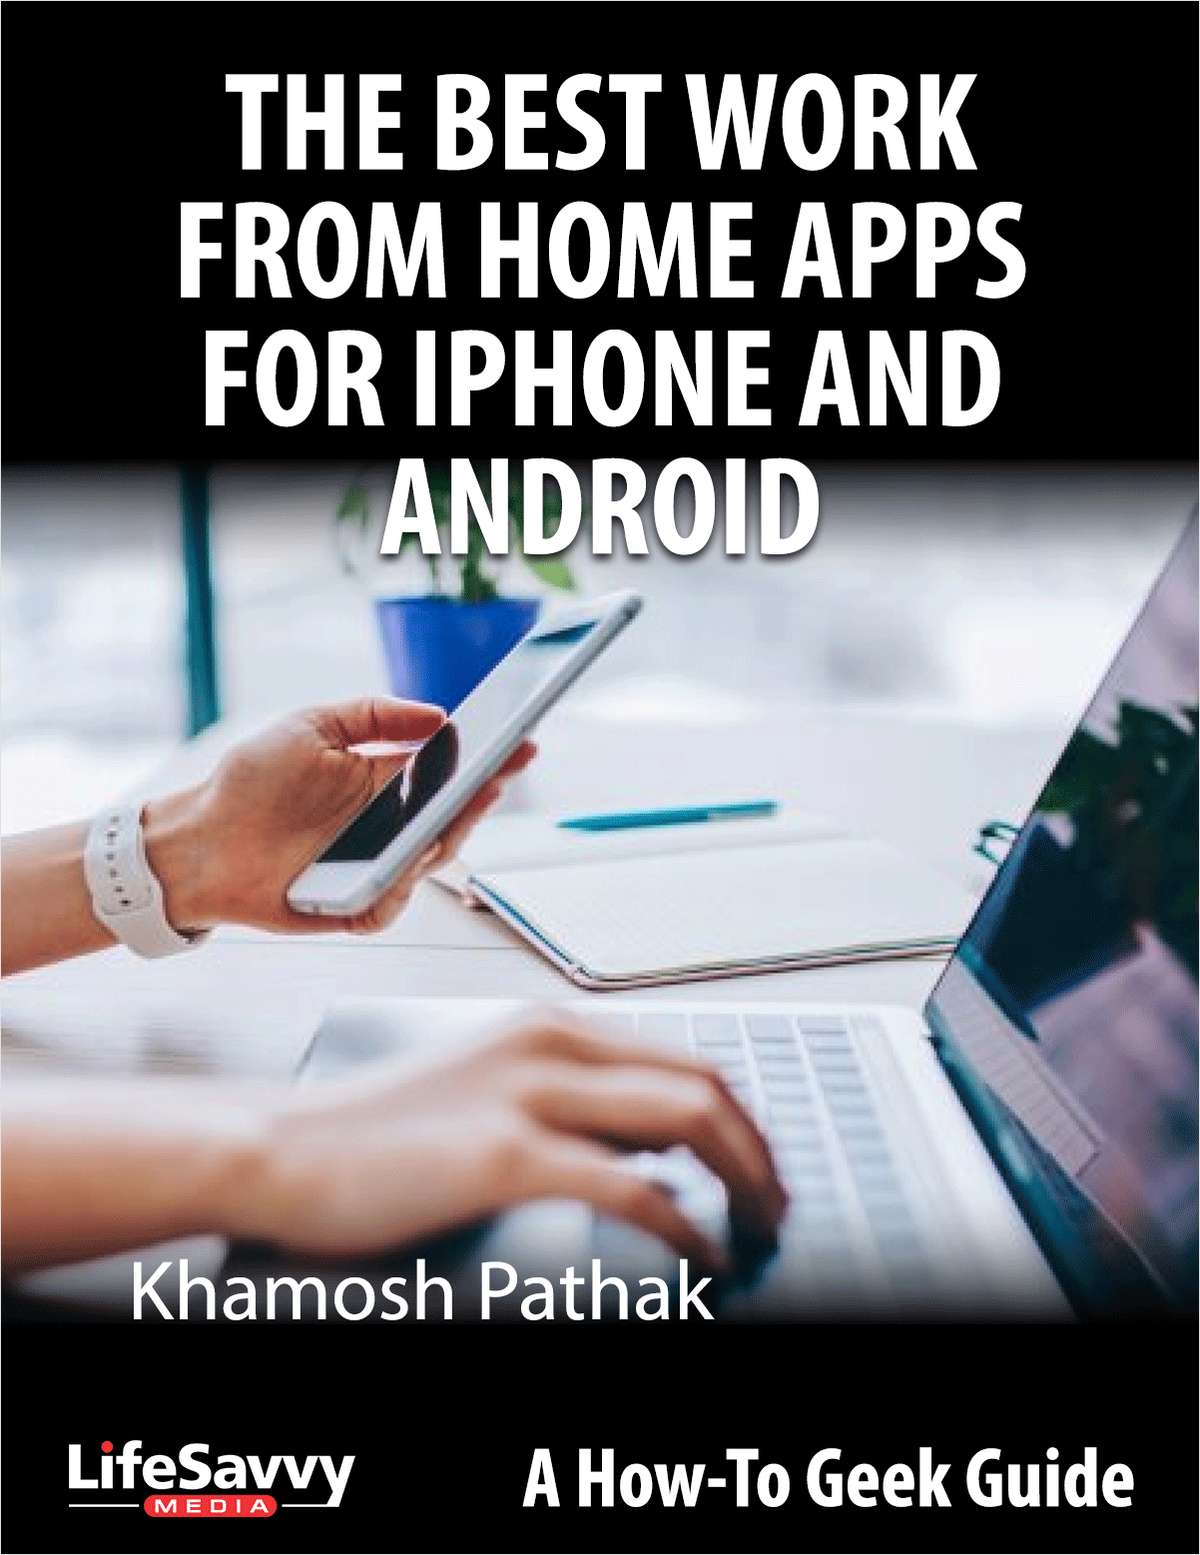 The Best Work From Home Apps for iPhone and Android